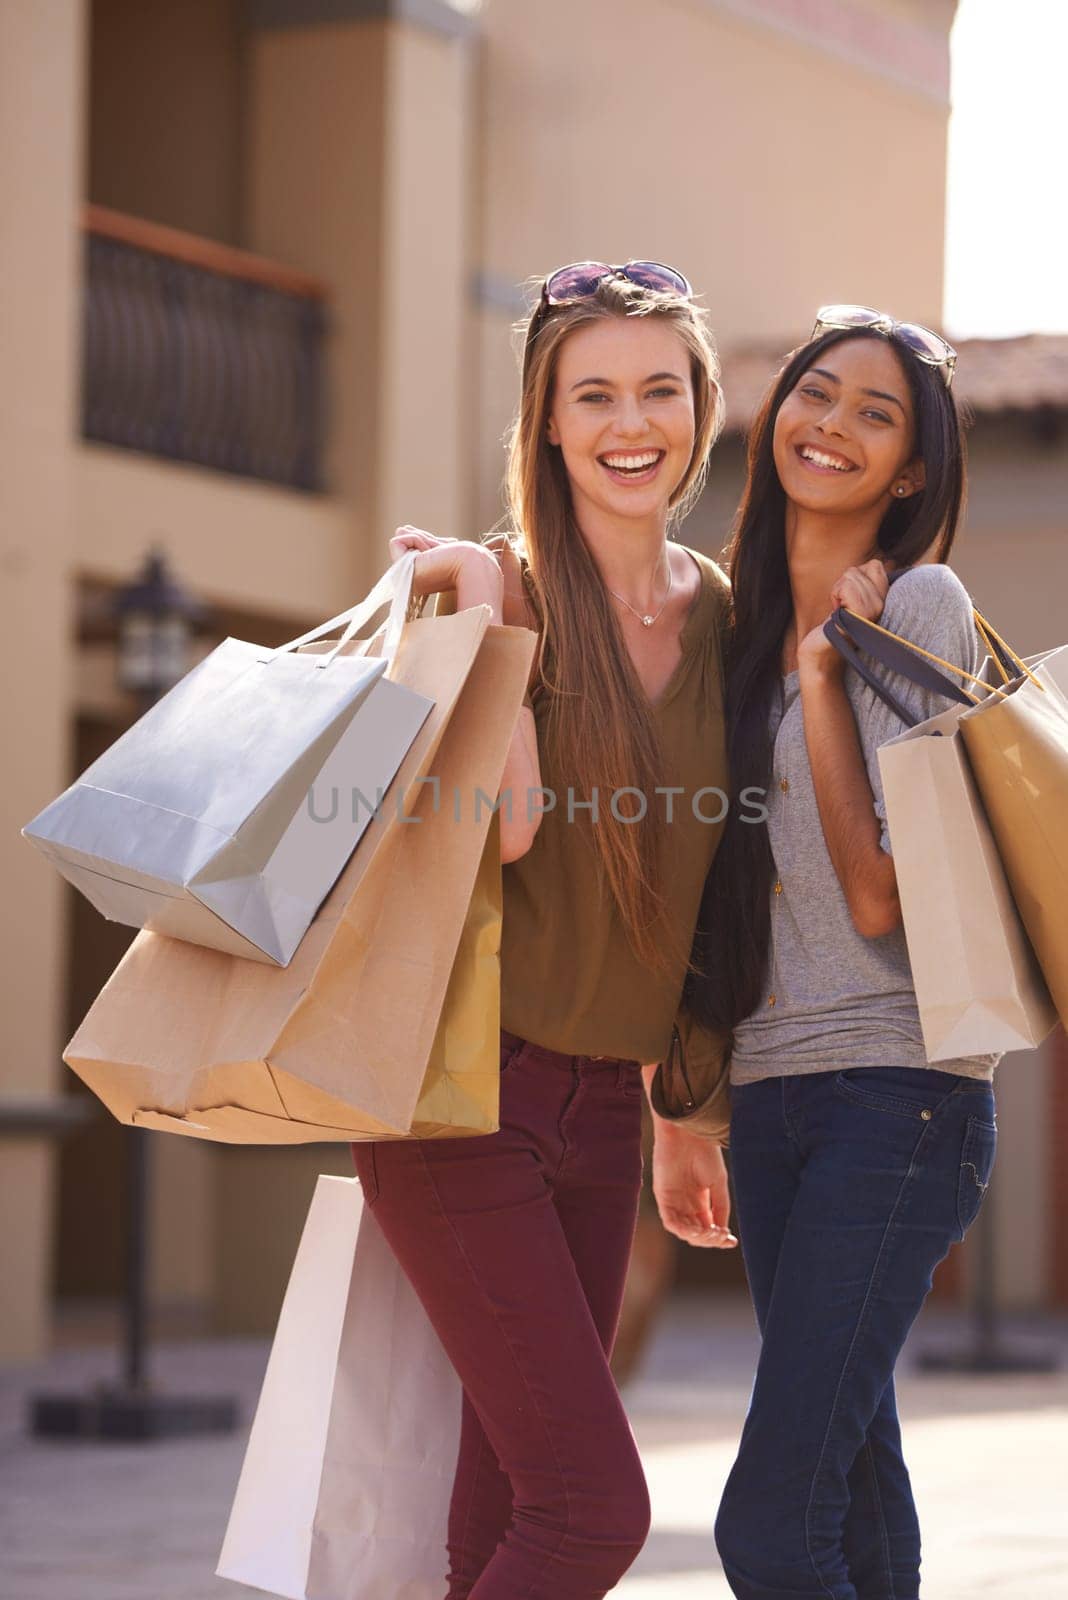 Women, happy and shopping bag in city for fashion, sale and discount with portrait outdoor in Europe. Young people or friends with smile and diversity for retail purchase, travel and style or clothes.